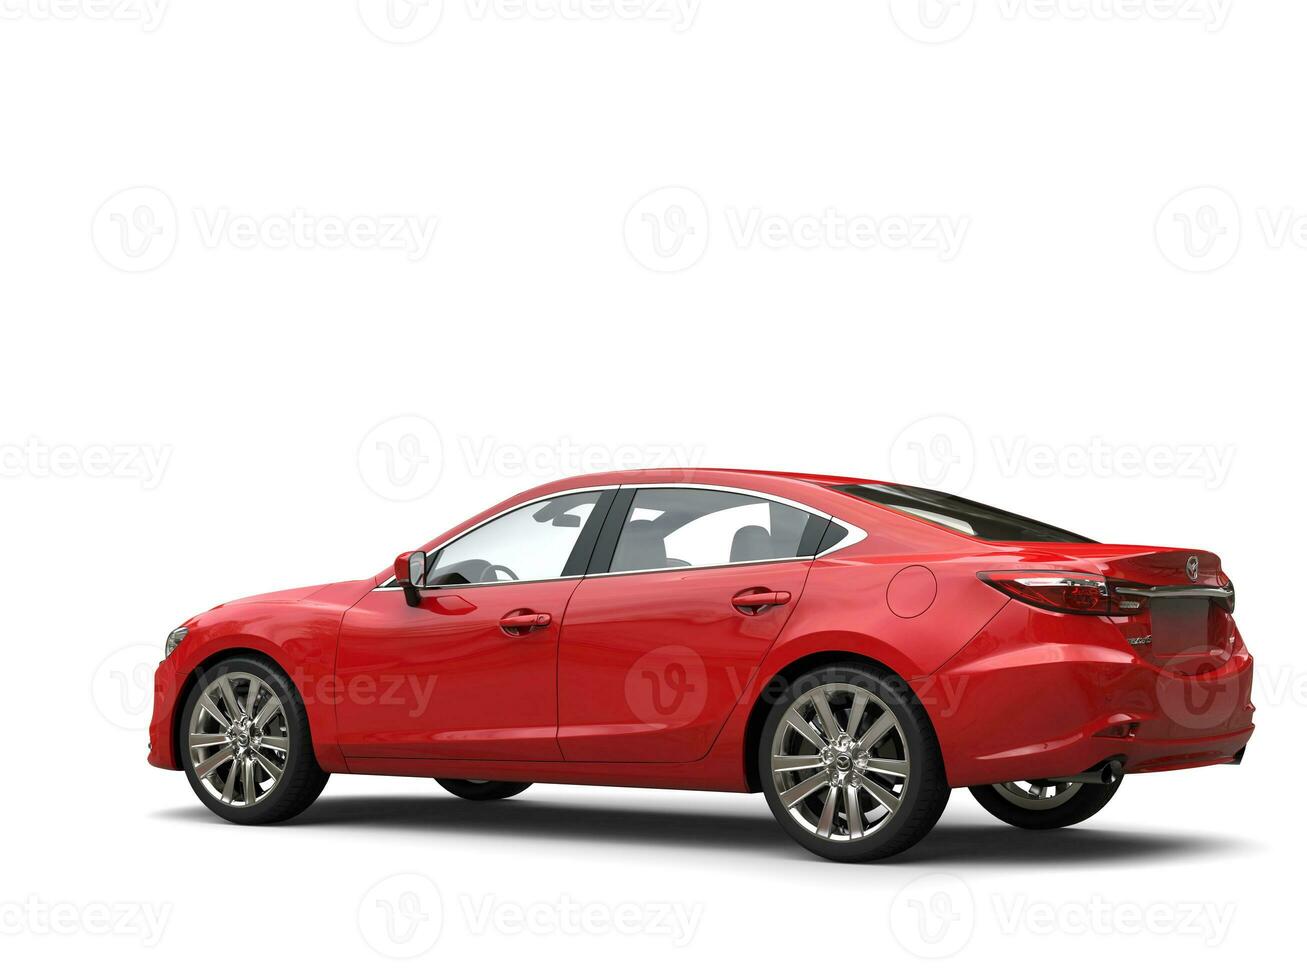 Red Mazda 6 2018 - 2021 model - side view - 3D Illustration - isolated on white background photo